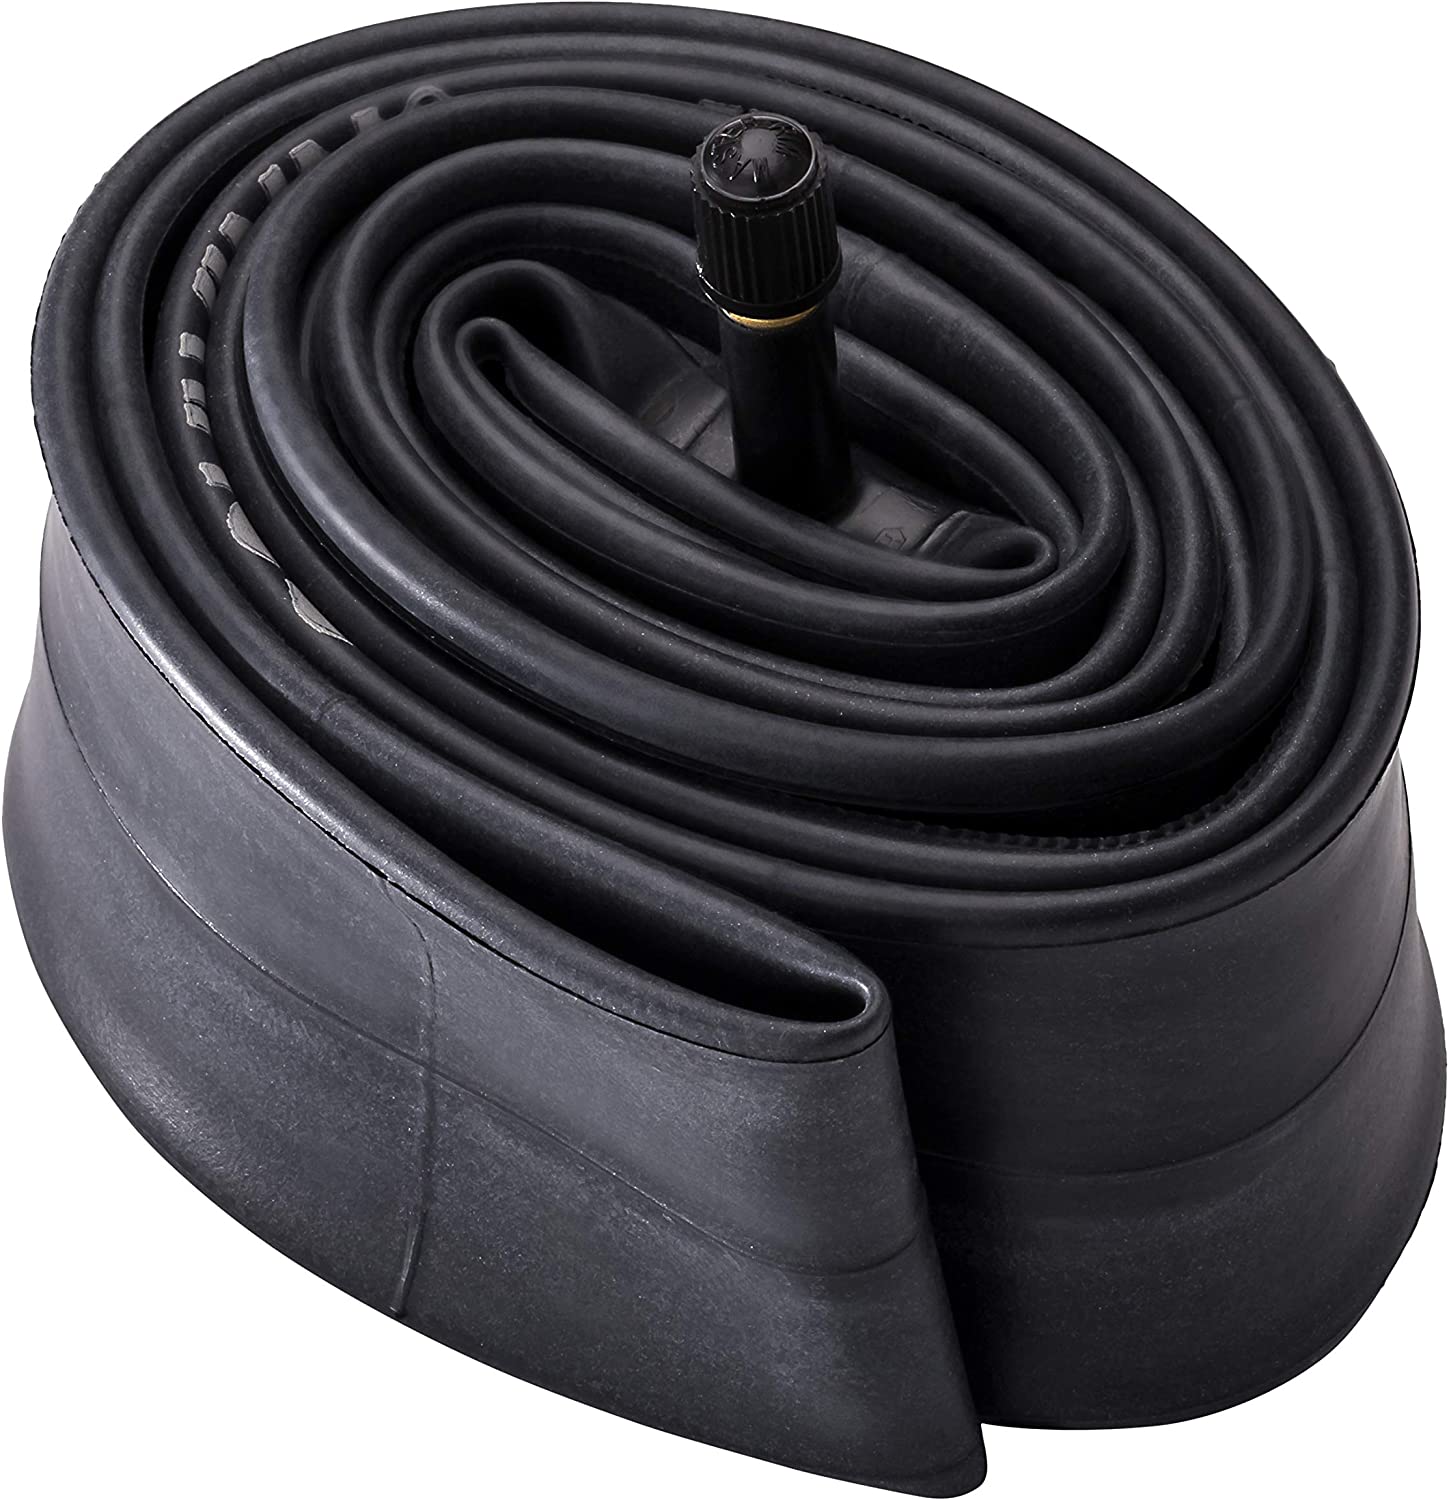 A black bicycle tire with a Tube - 26 x 4 on top.